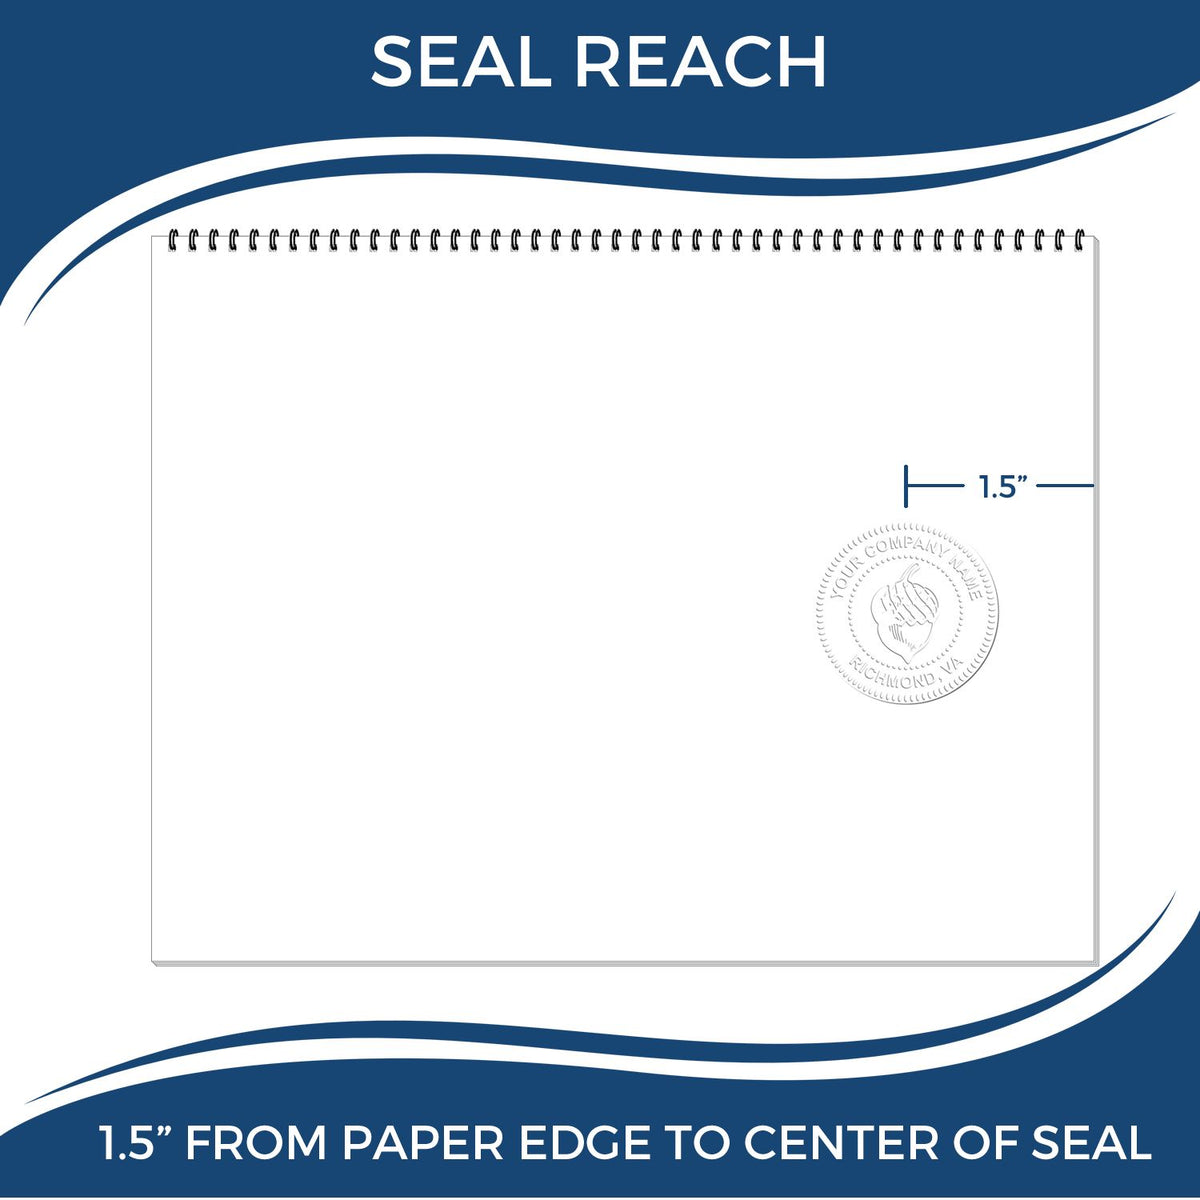 An infographic showing the seal reach which is represented by a ruler and a miniature seal image of the Soft Pocket Montana Landscape Architect Embosser